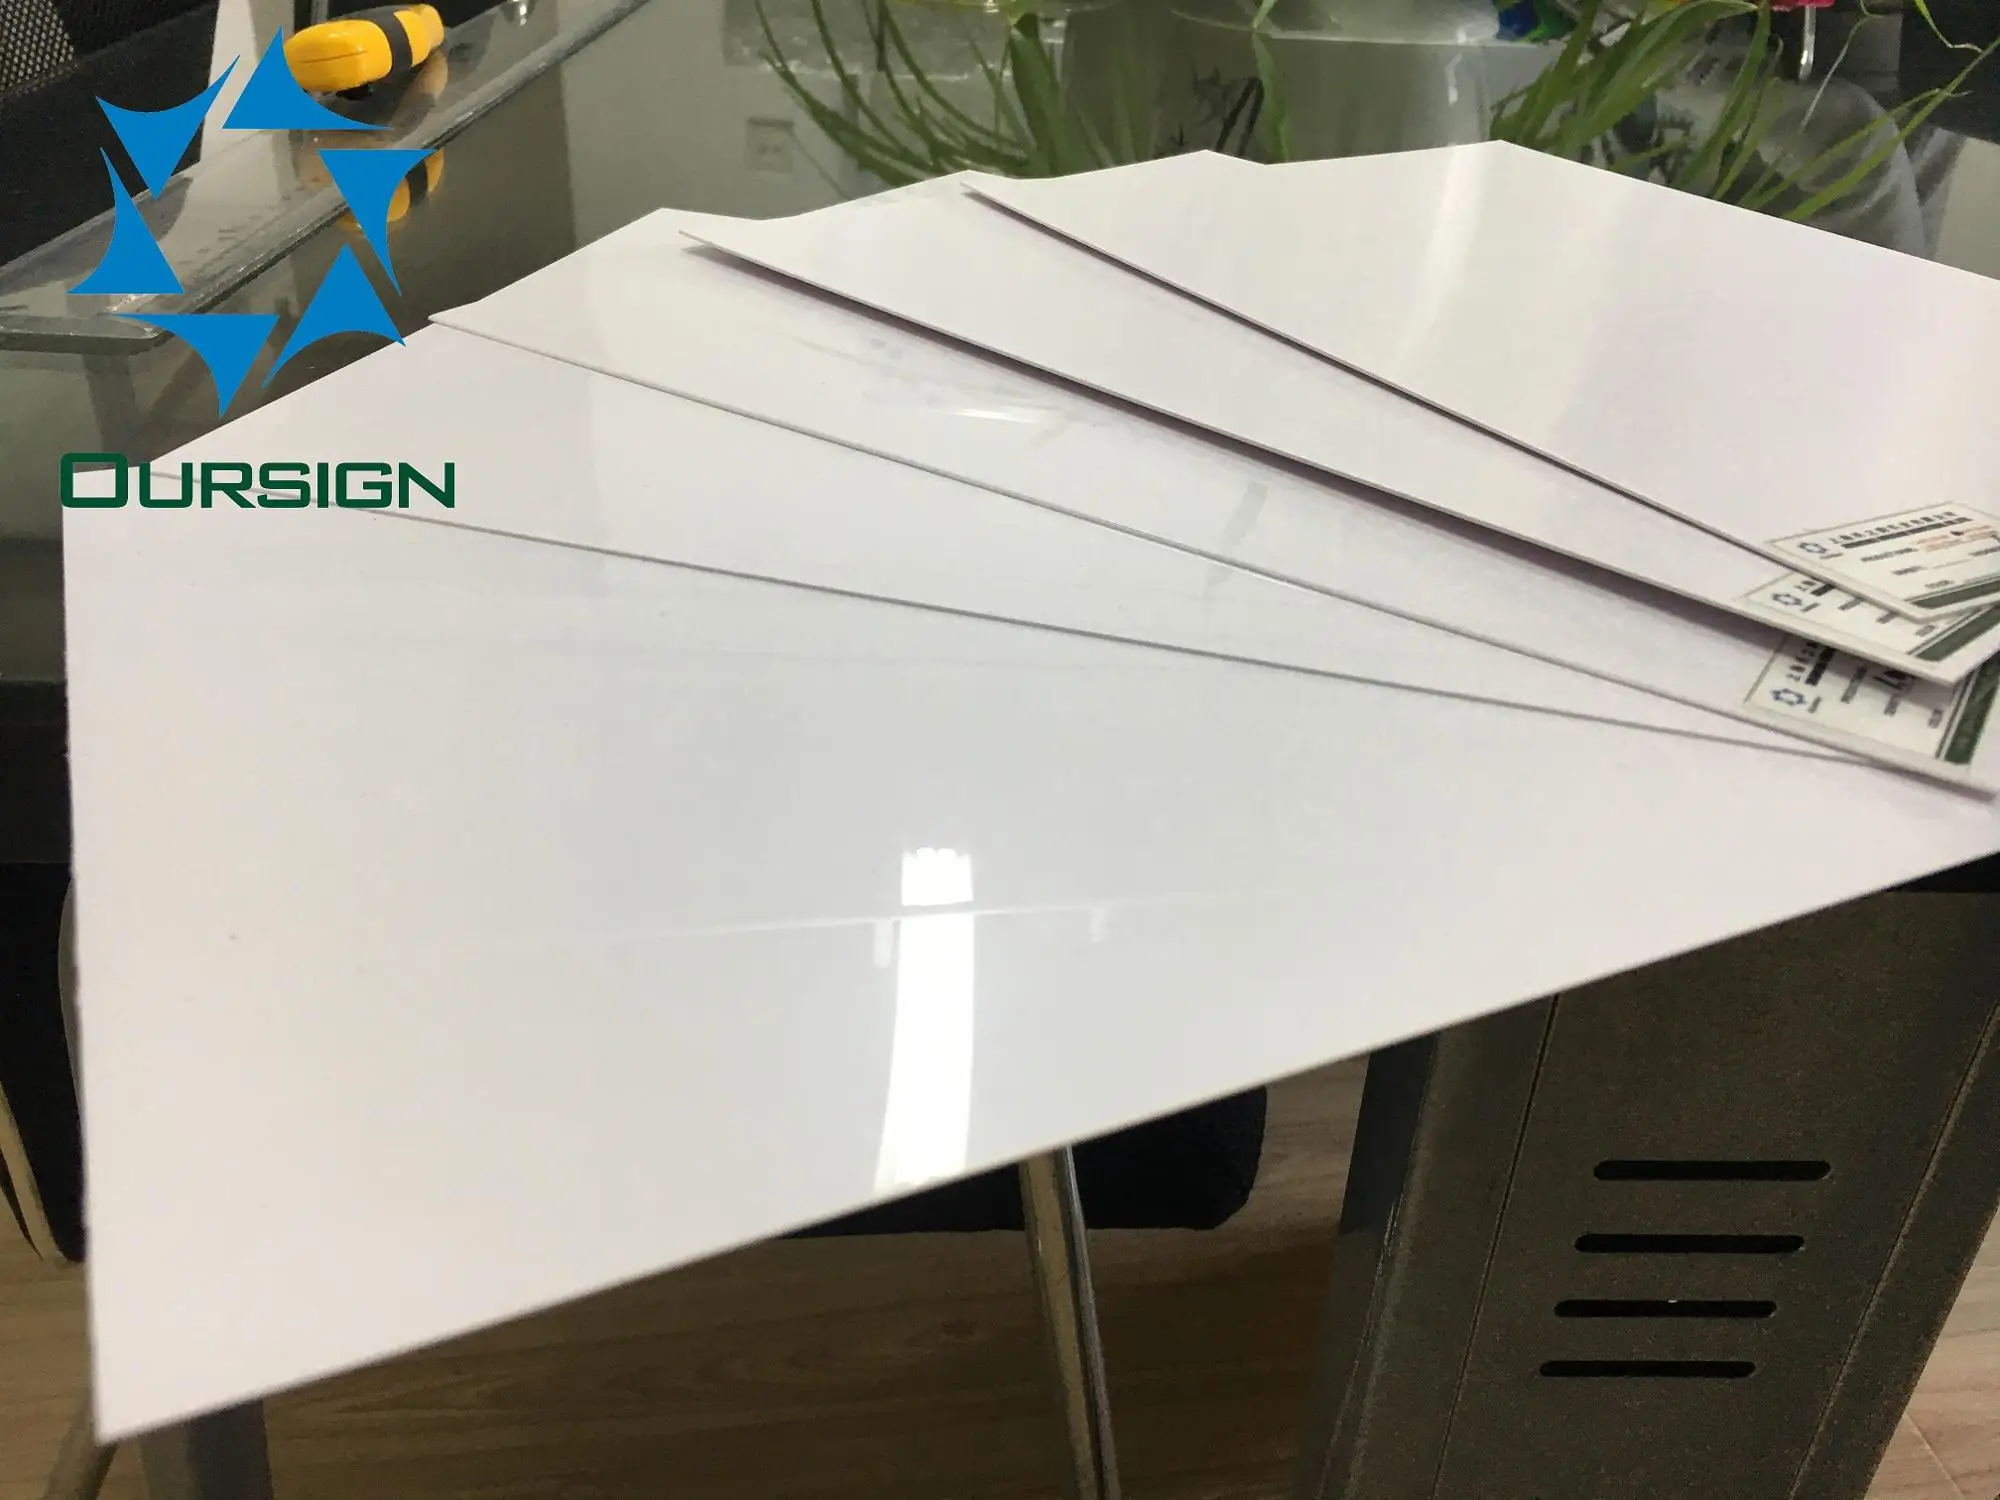 Abs Plastic Sheet For Vacuum Forming Buy Abs Plastic Sheet 4x8,Abs Sheet Price,Abs Plastic